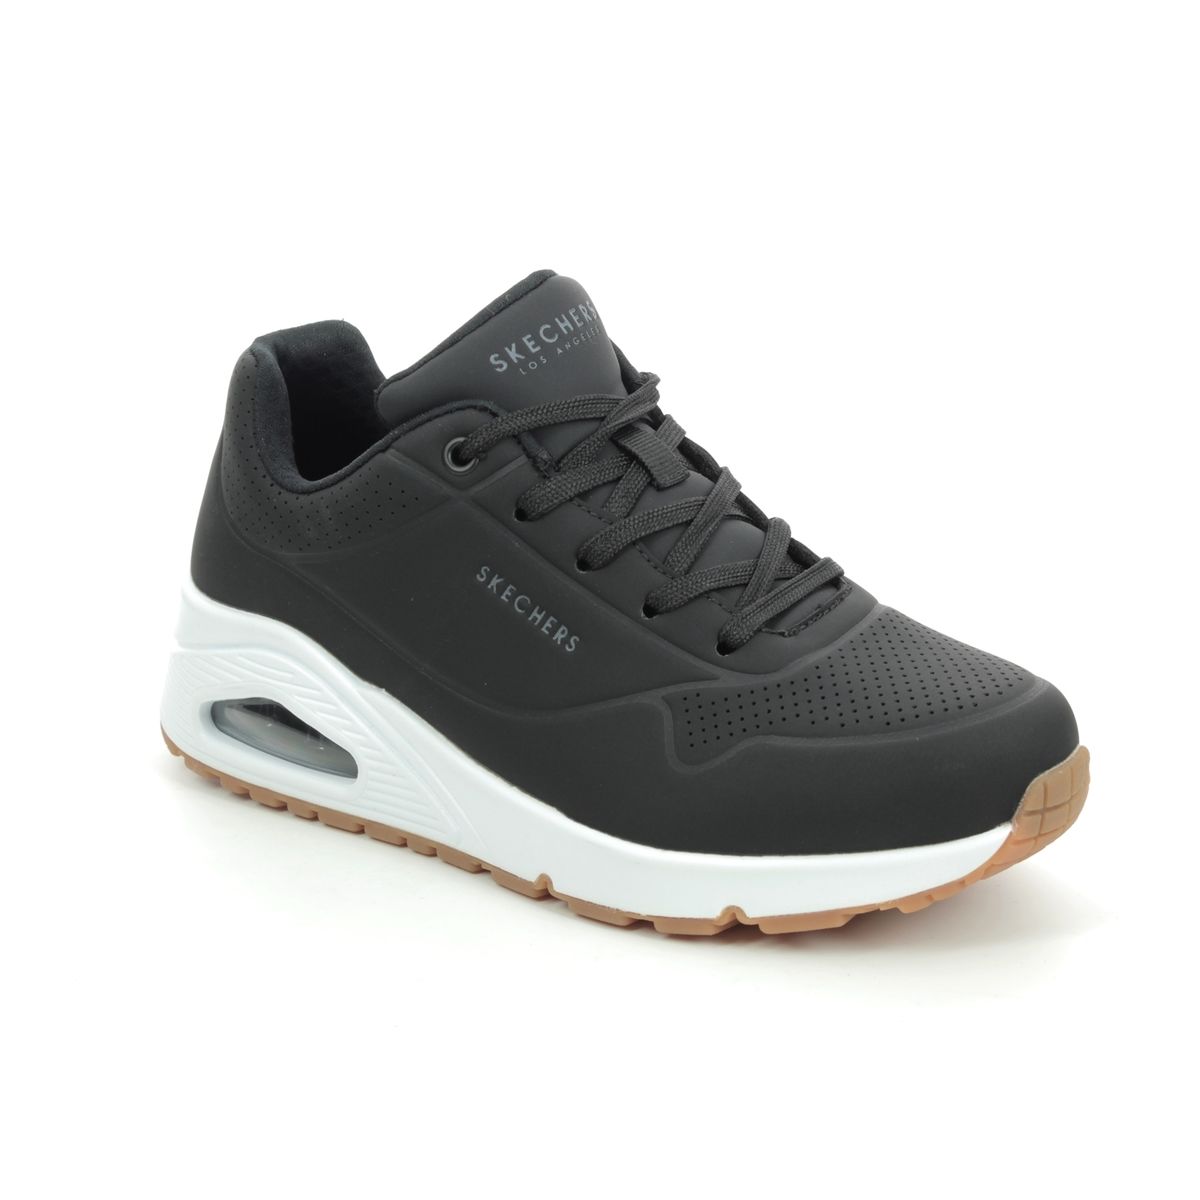 Skechers Uno Stand Air 73690 BLK Black trainers